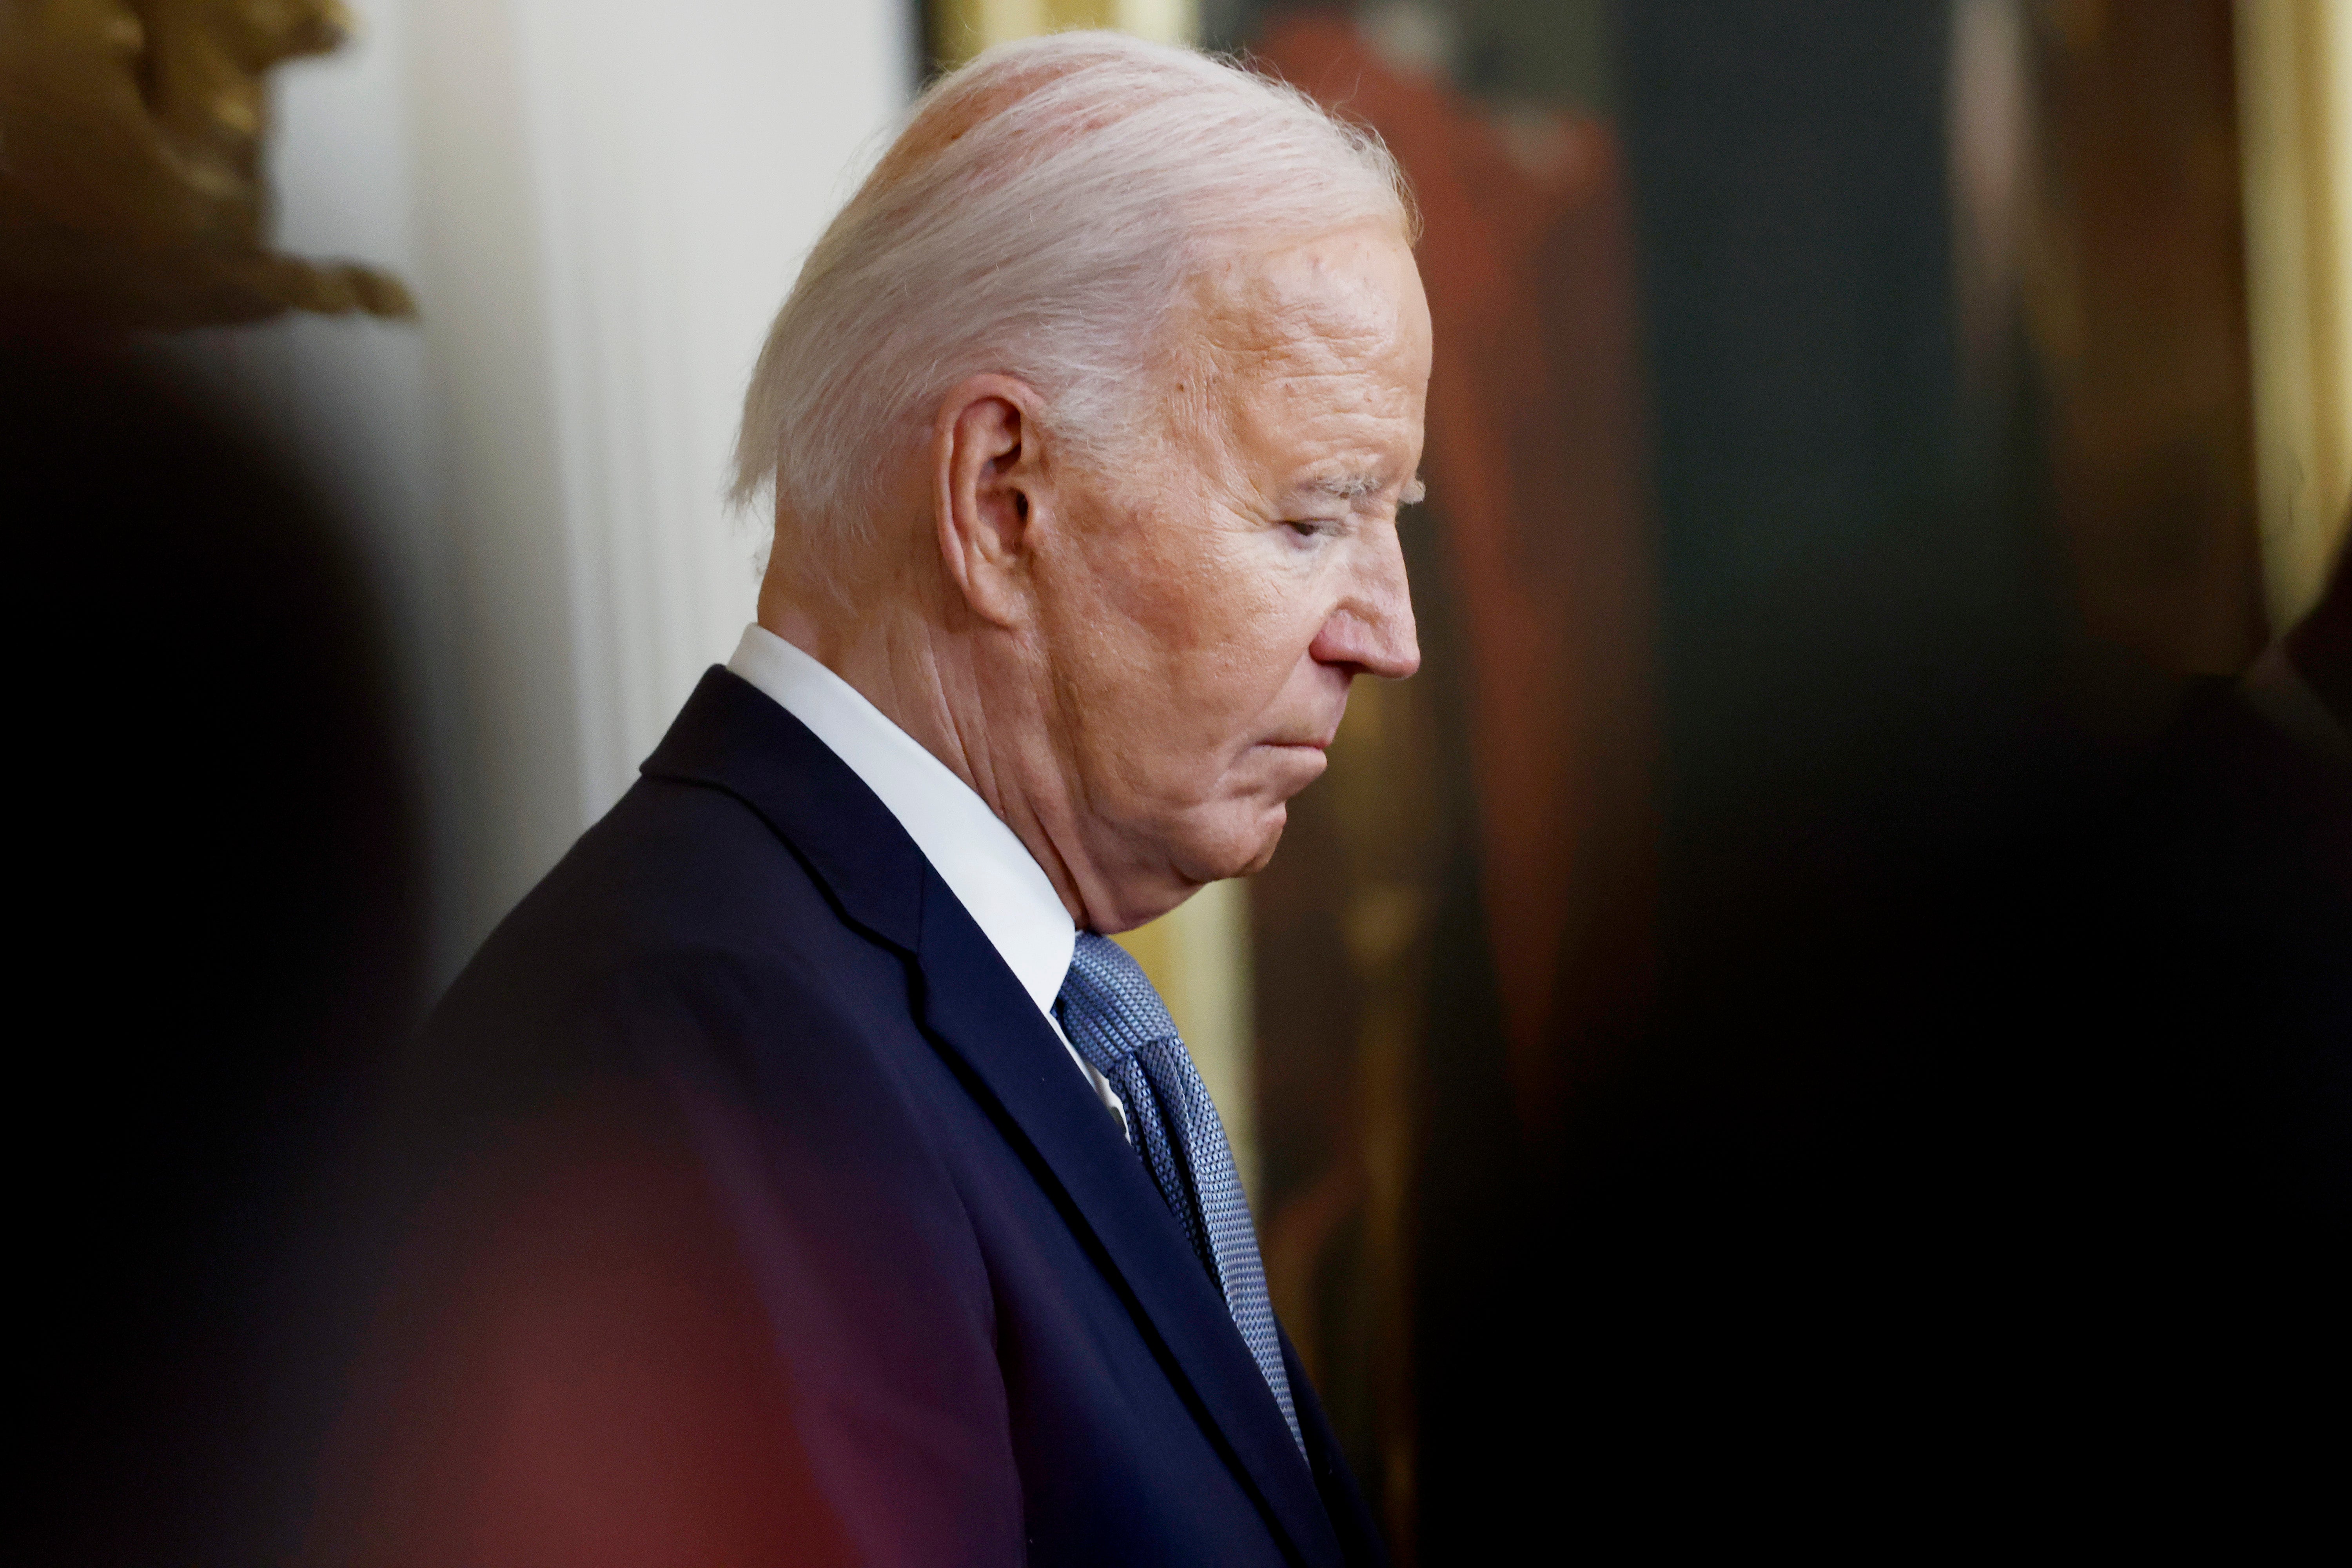 President Joe Biden has said he has no plans to withdraw from the race, despite calls for him to do so, following his diastrous dbate performance against Donald Trump last week